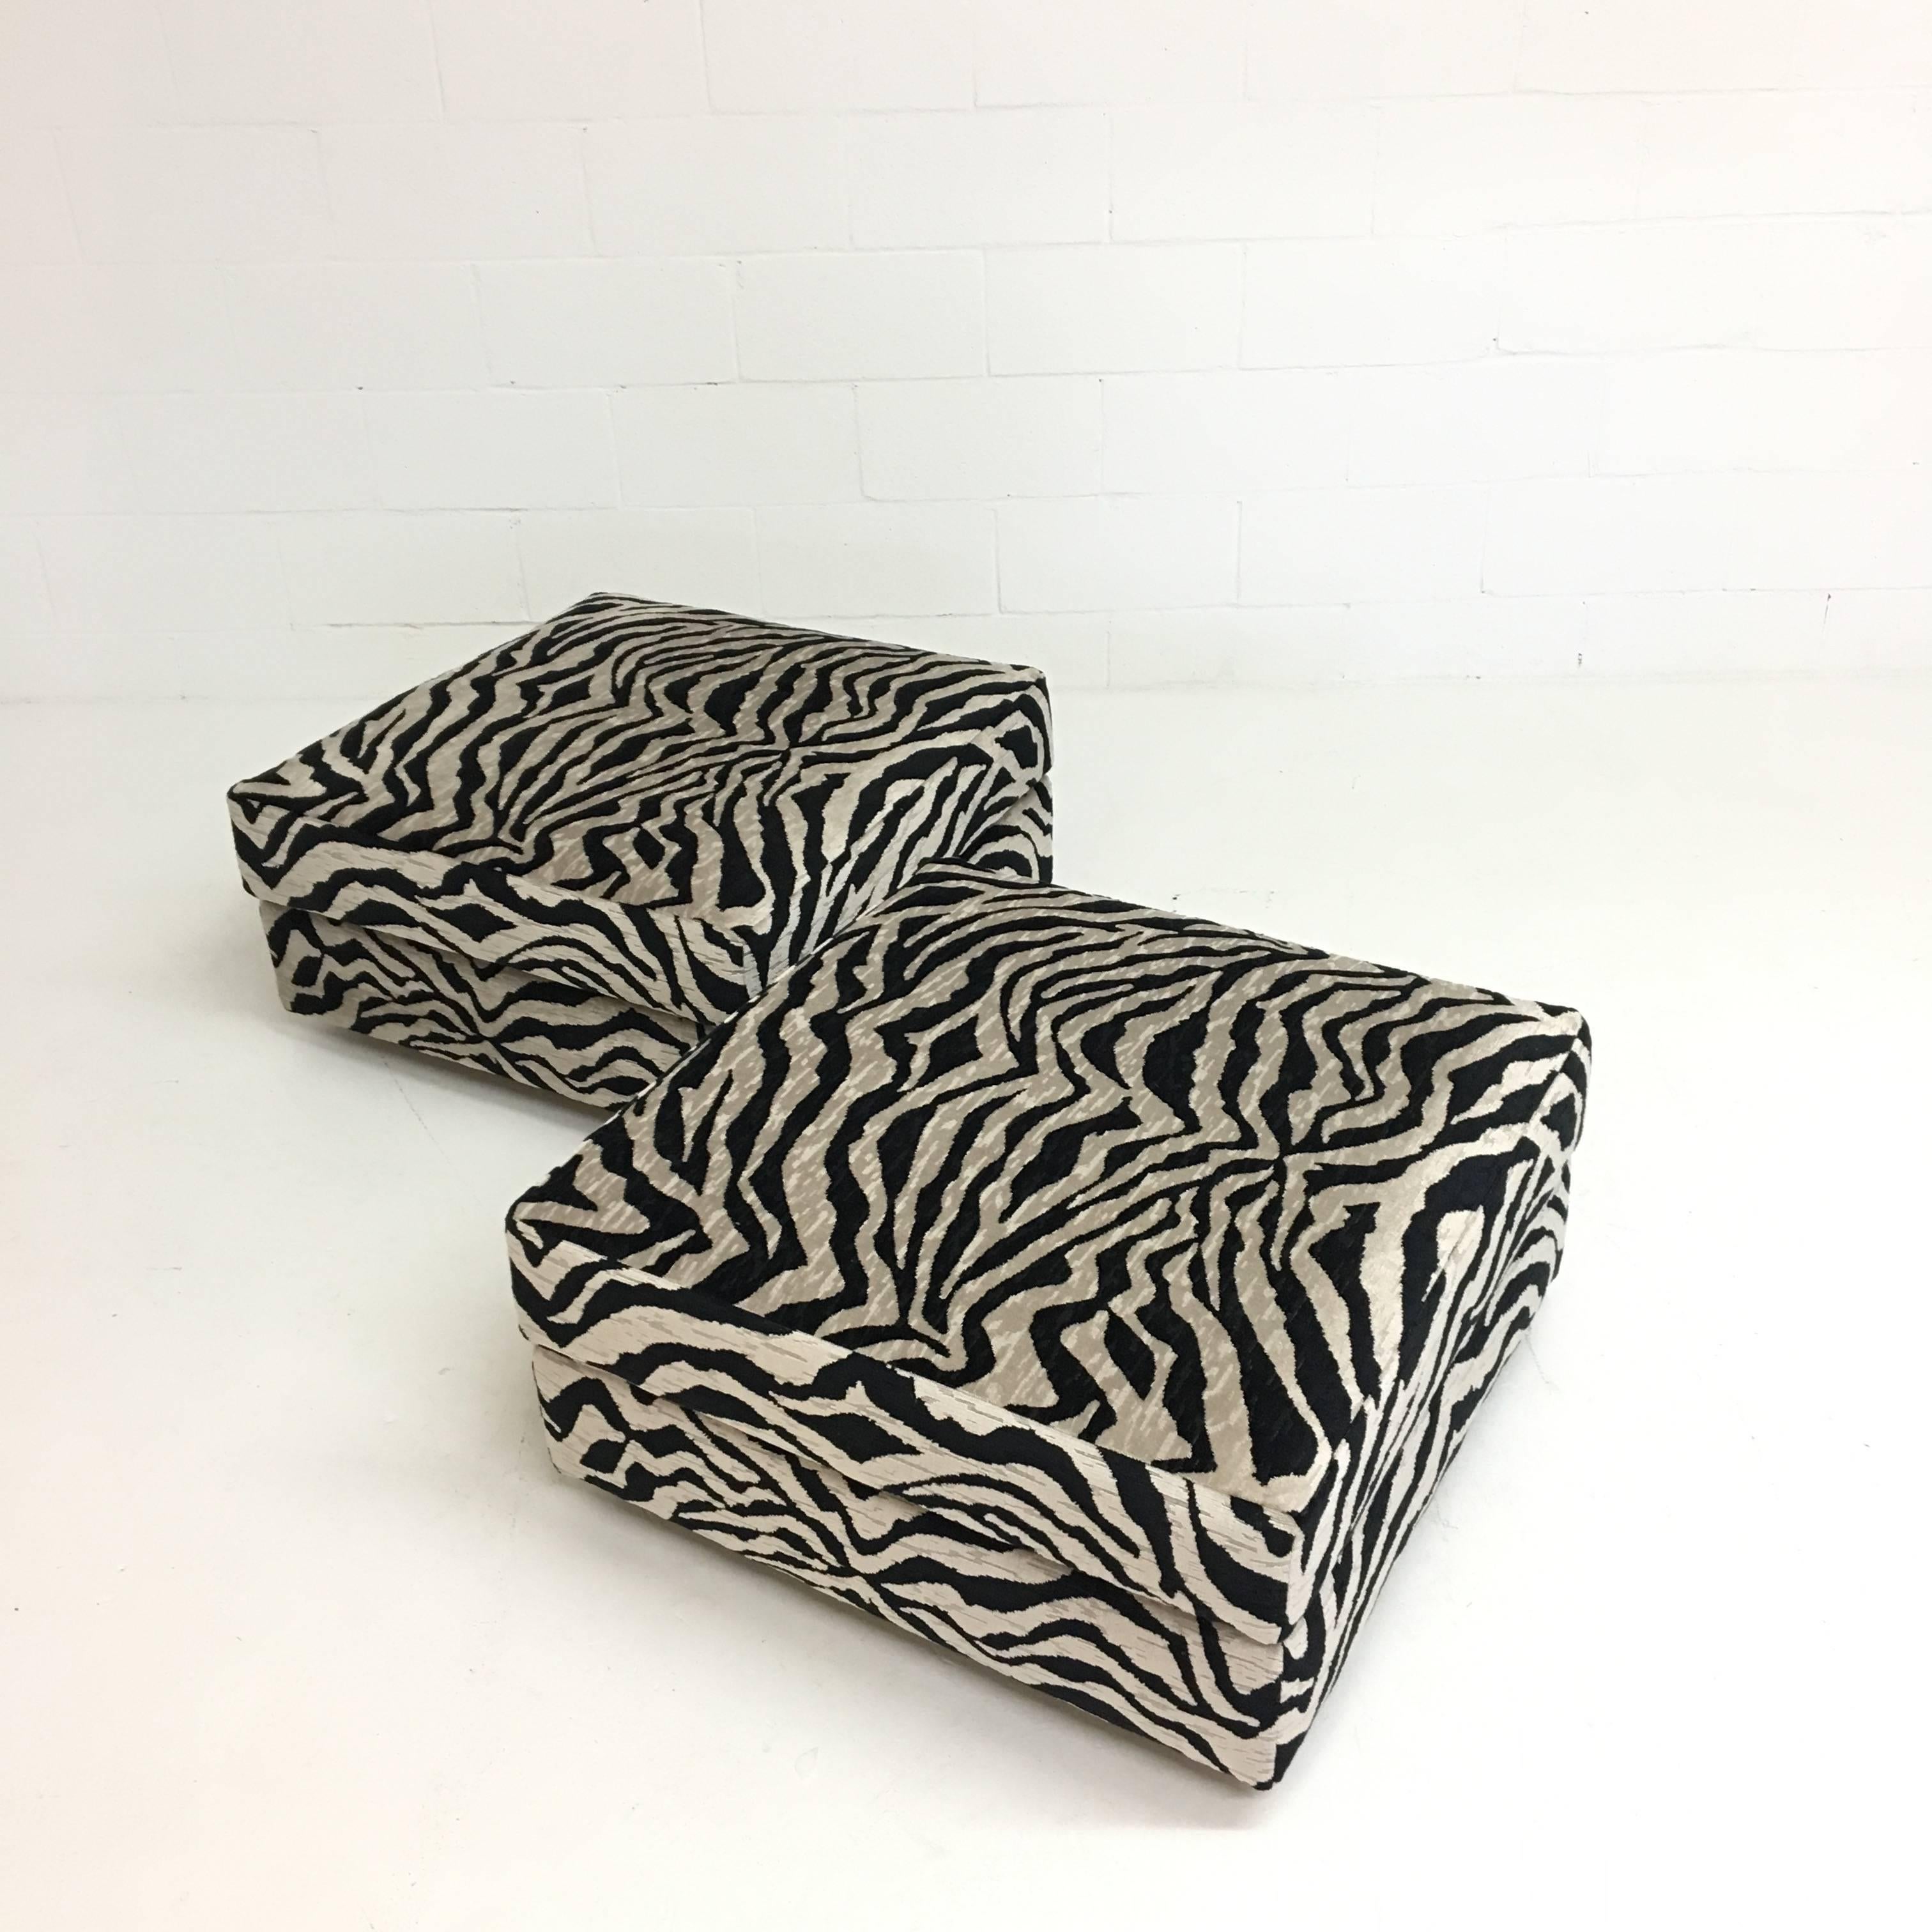 A pair of Mid-Century ottomans that have been reupholstered in a graphic zebra print velvet in gray and black. Each item is set on four casters for easy moving.